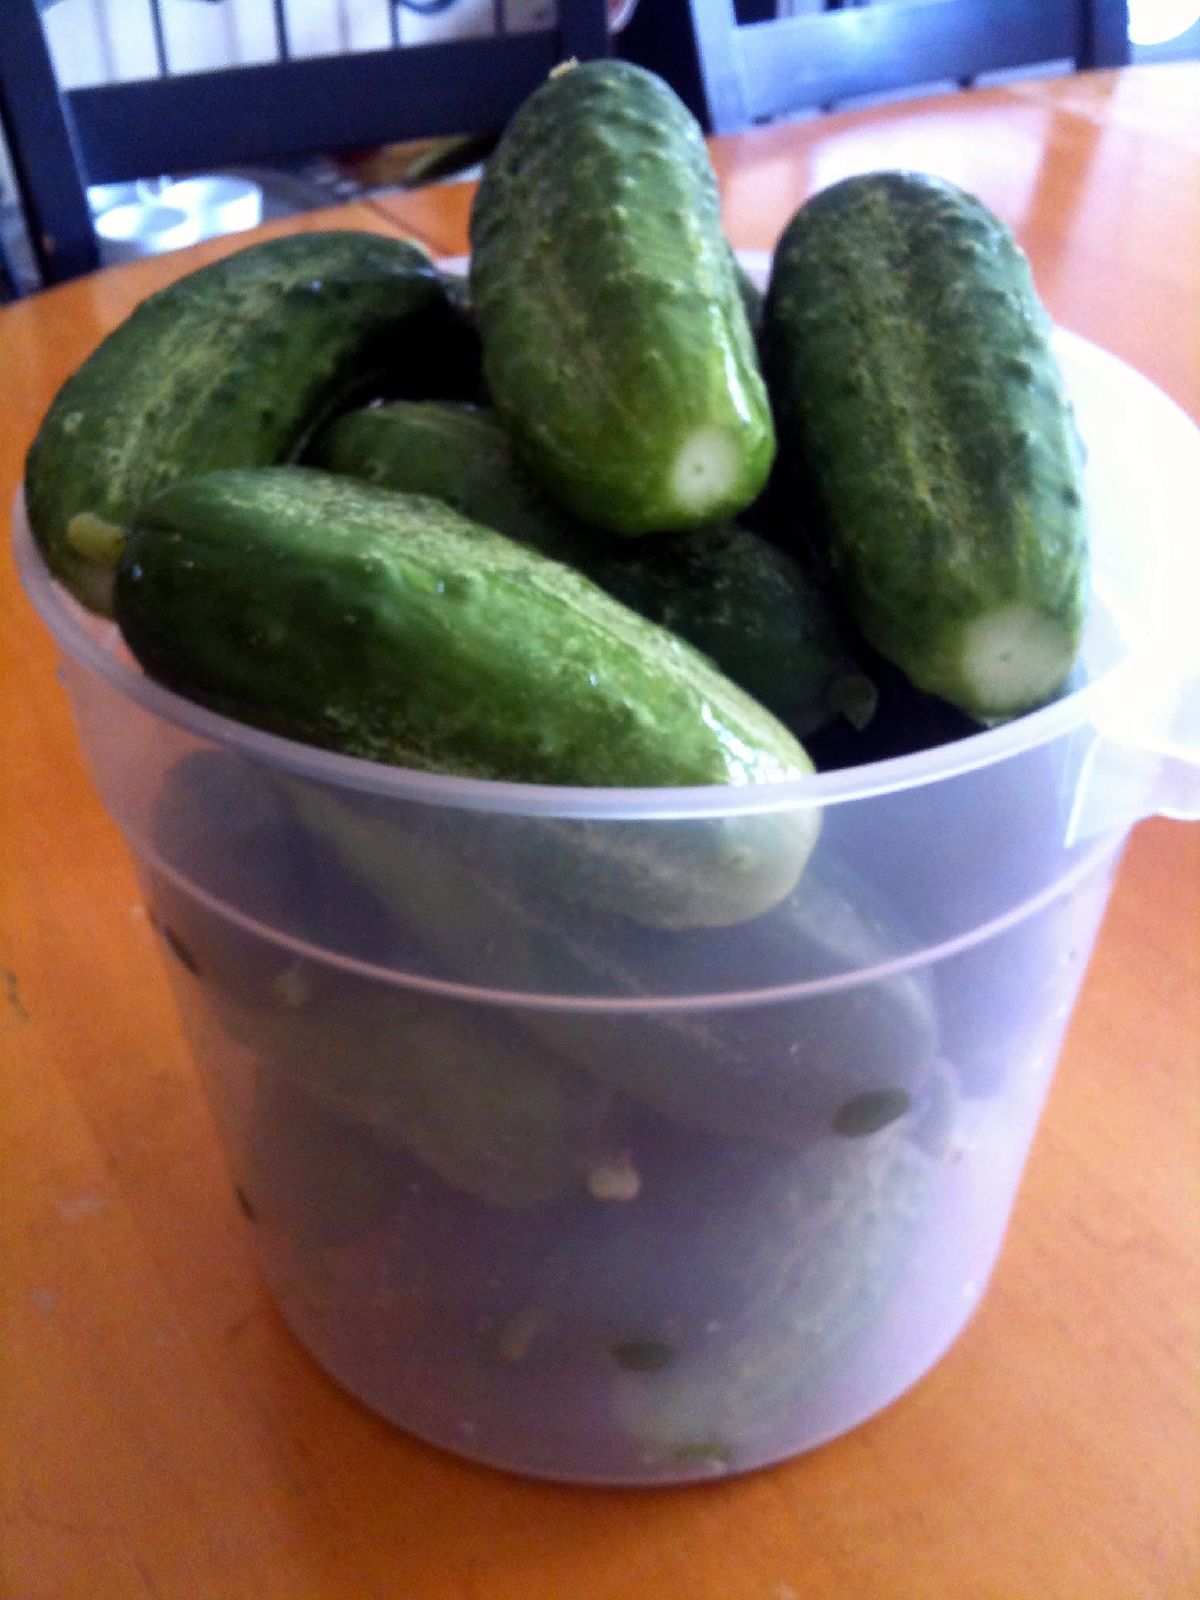 a group of pickles in a small plastic container